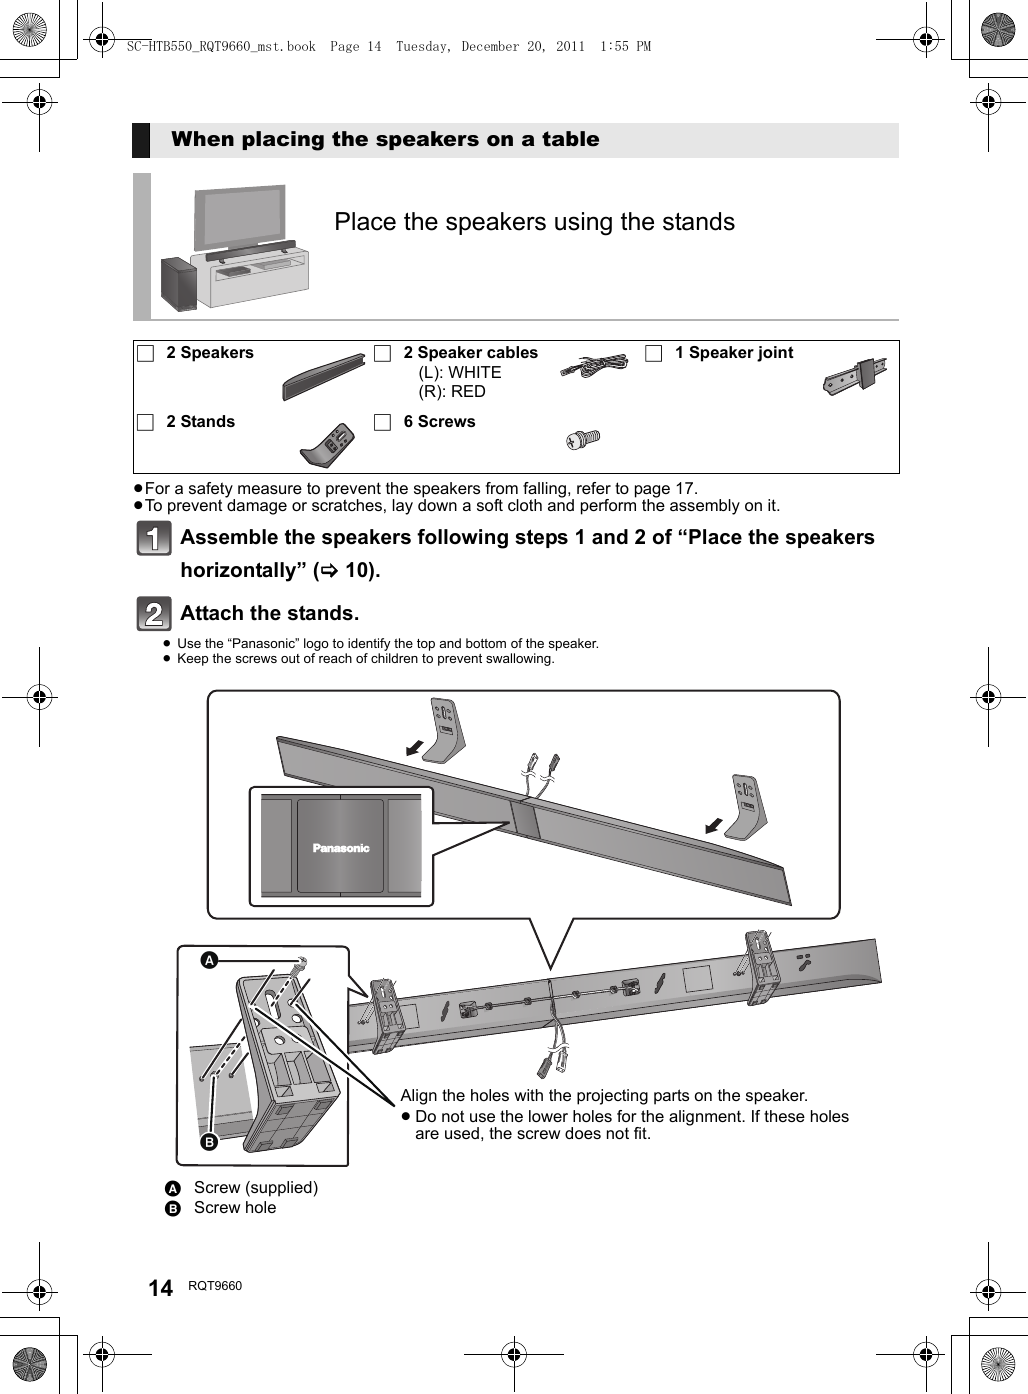 14 RQT9660≥For a safety measure to prevent the speakers from falling, refer to page 17.≥To prevent damage or scratches, lay down a soft cloth and perform the assembly on it.Assemble the speakers following steps 1 and 2 of “Place the speakers horizontally” (&gt;10).Attach the stands. ≥Use the “Panasonic” logo to identify the top and bottom of the speaker.≥Keep the screws out of reach of children to prevent swallowing.When placing the speakers on a tablePlace the speakers using the stands∏2 Speakers ∏2 Speaker cables(L): WHITE(R): RED∏1 Speaker joint∏2 Stands ∏6 ScrewsScrew (supplied)Screw holeAlign the holes with the projecting parts on the speaker.≥Do not use the lower holes for the alignment. If these holes are used, the screw does not fit.SC-HTB550_RQT9660_mst.book  Page 14  Tuesday, December 20, 2011  1:55 PM